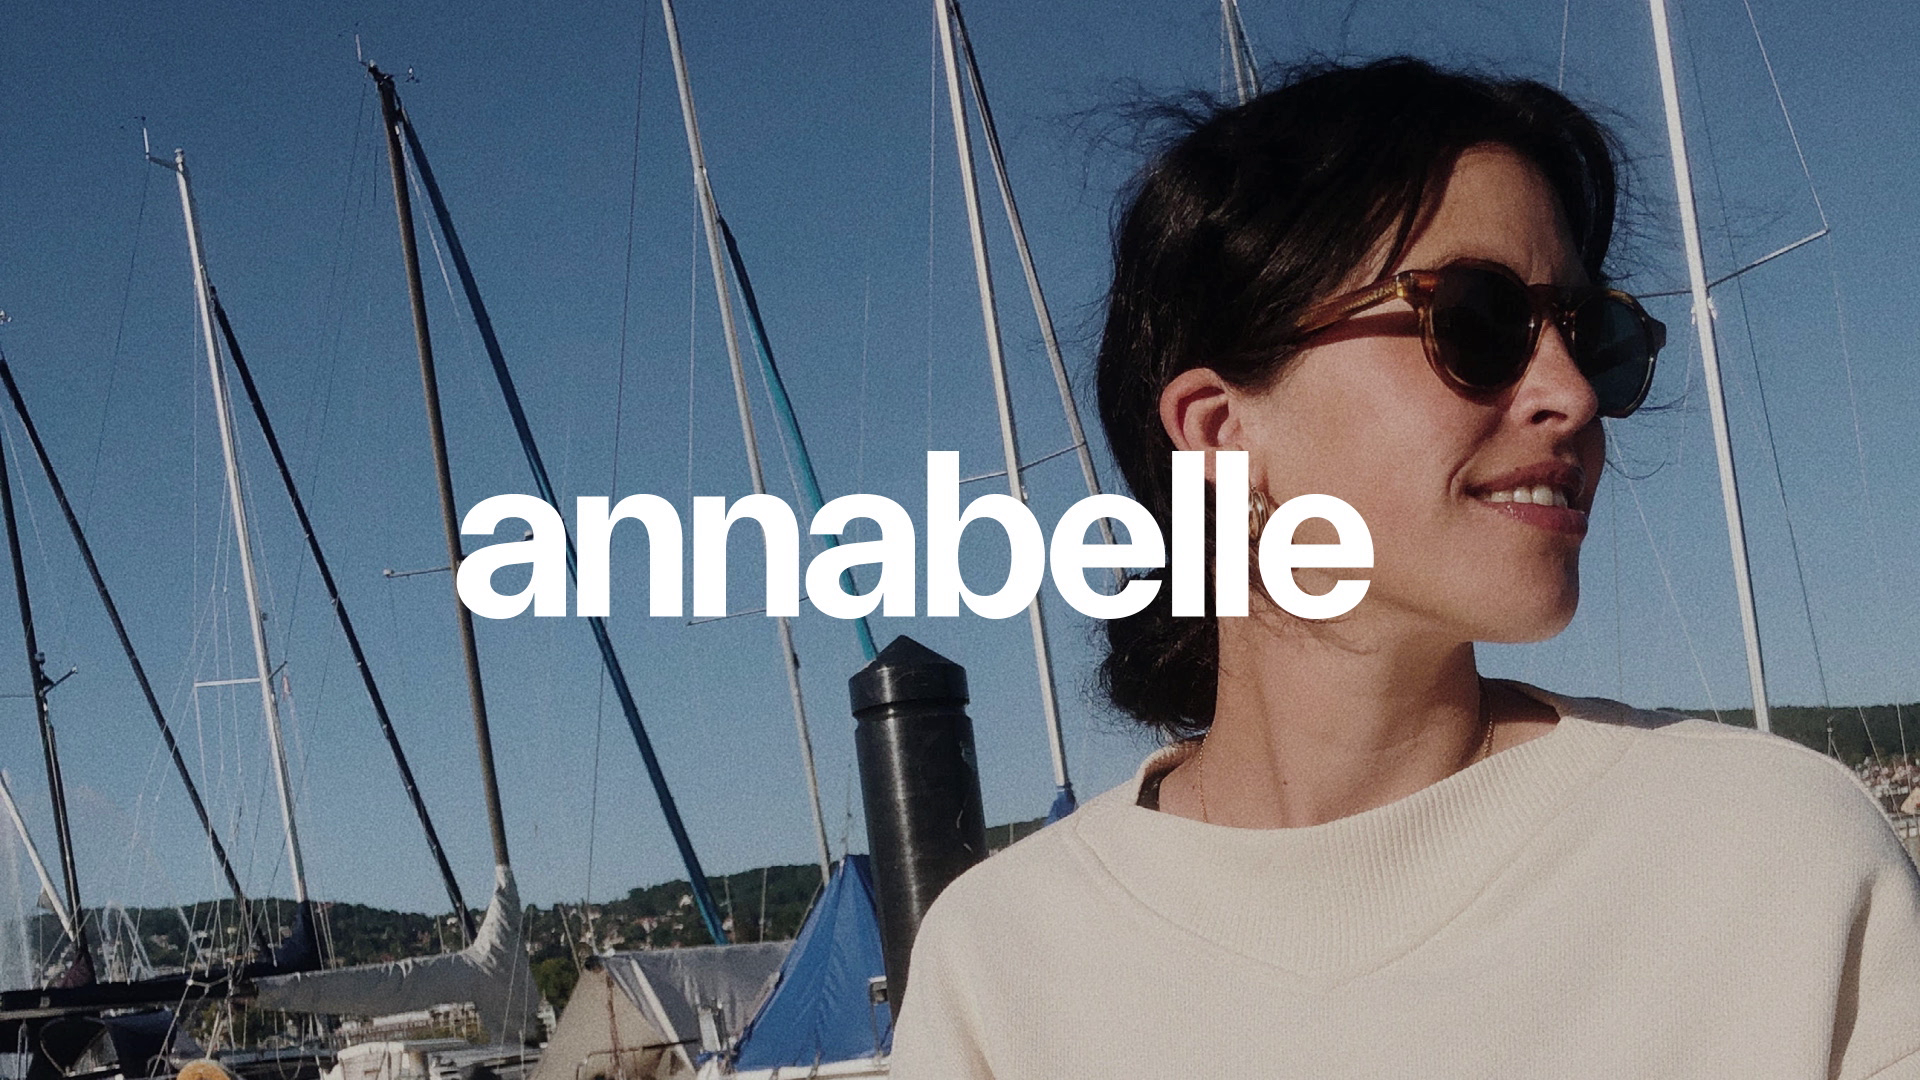 Picture of a woman wearing sunglasses with the caption annabelle